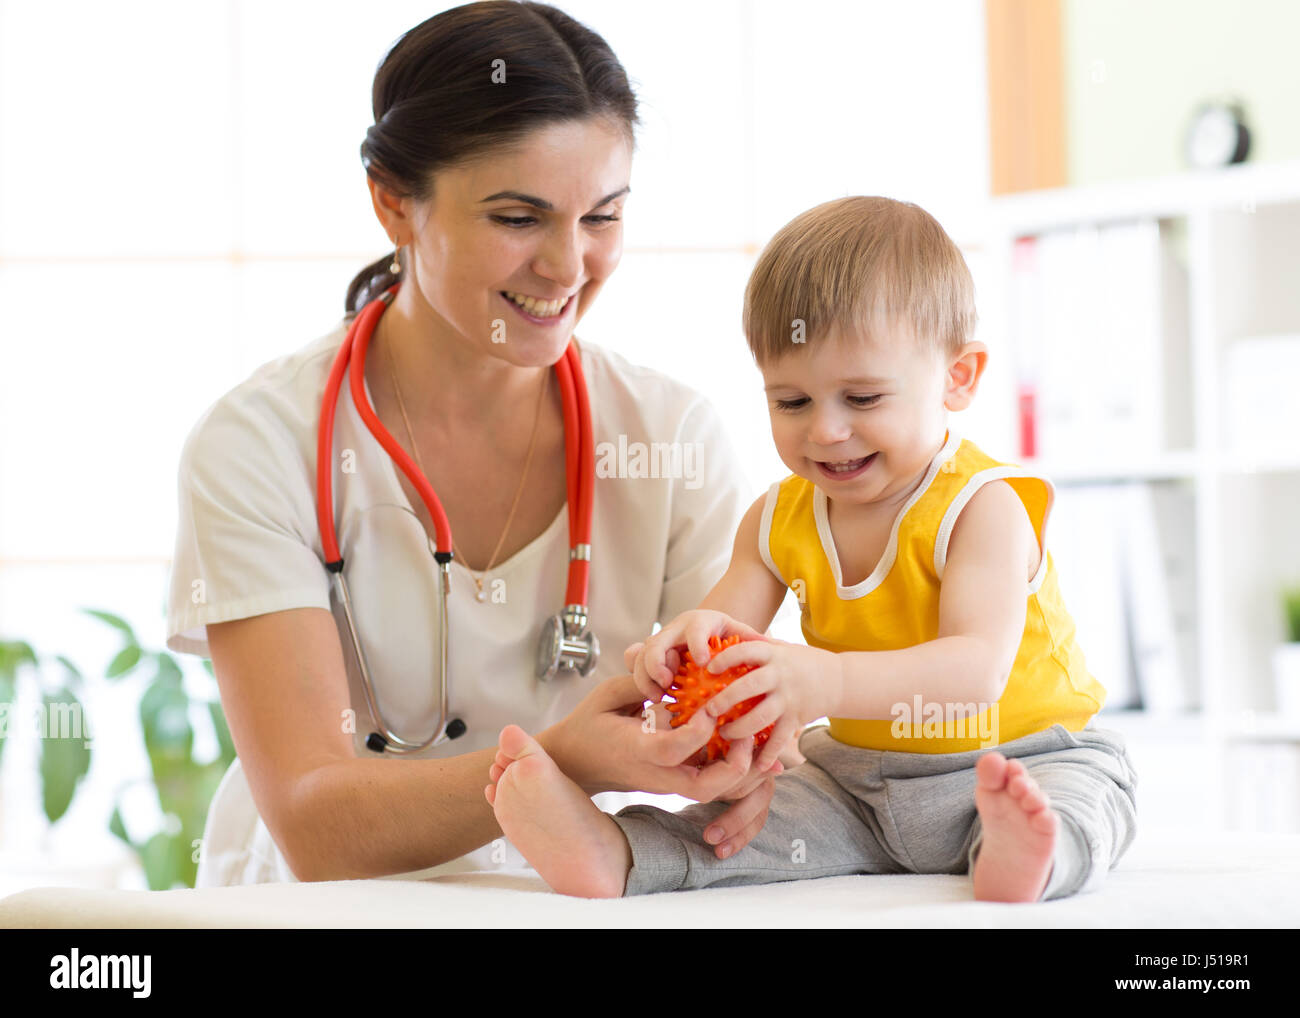 Doctor doing massage to little patient using a ball Stock Photo